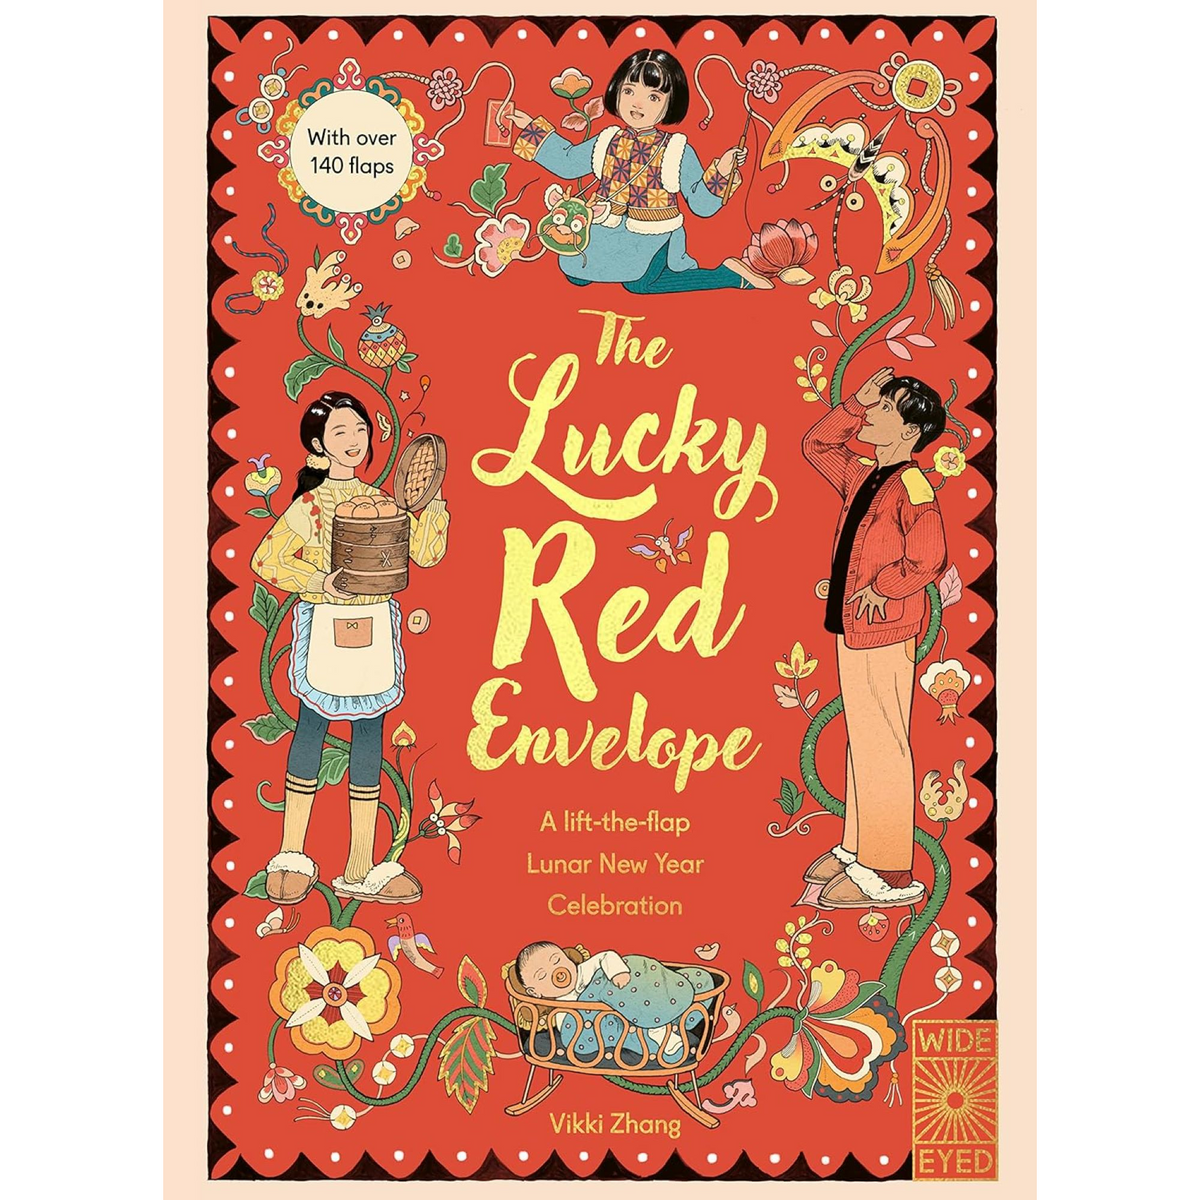 The Lucky Red Envelope: A lift-the-flap Lunar NY Celebration